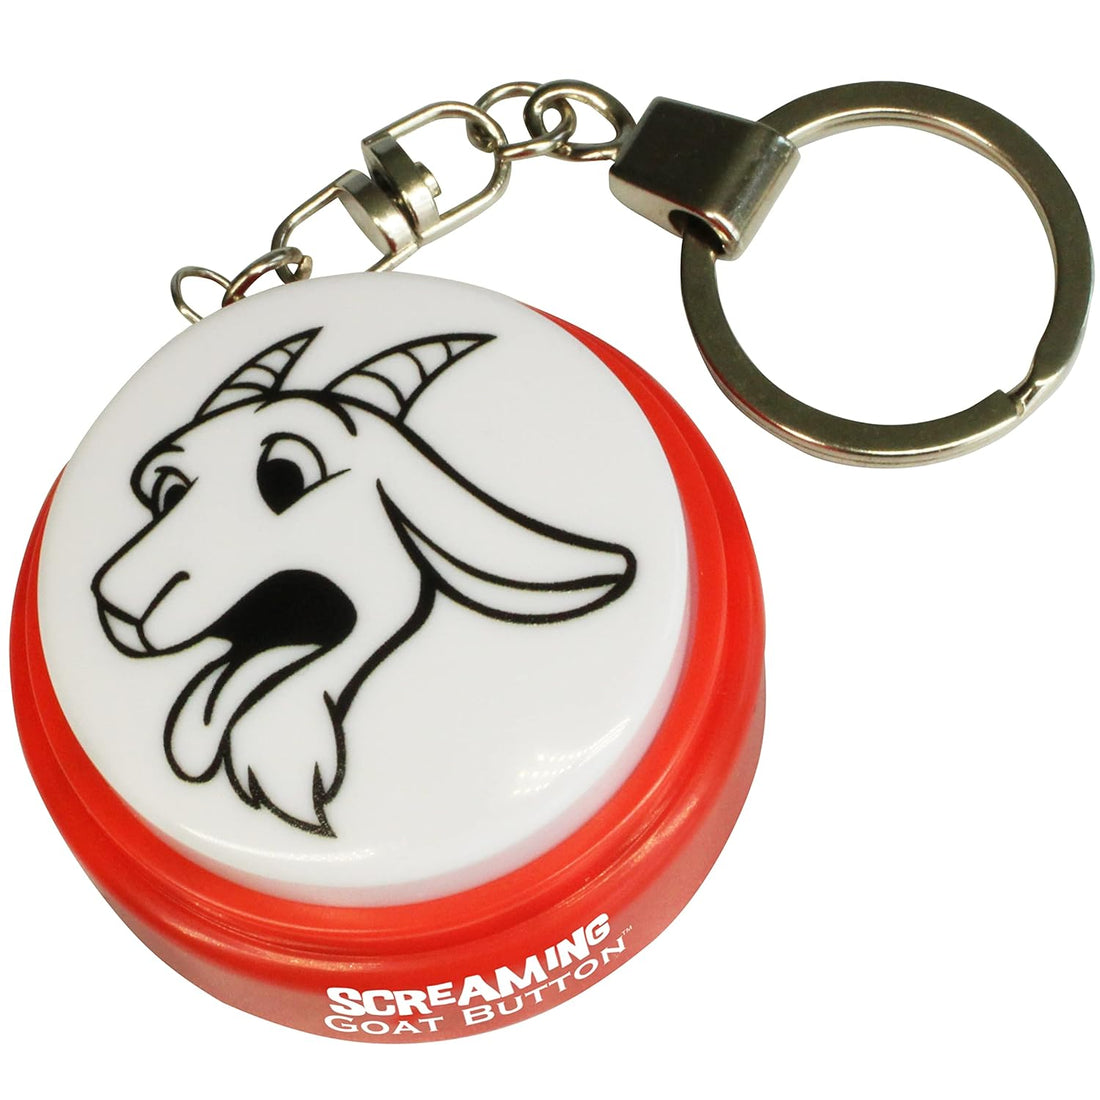 Screaming Goat Keychain Button | Gag Gifts for Men and Women | Screaming Goat Desk Toy Talking Button with a Funny Goat Scream | The Original Goat Scream, Red, Small